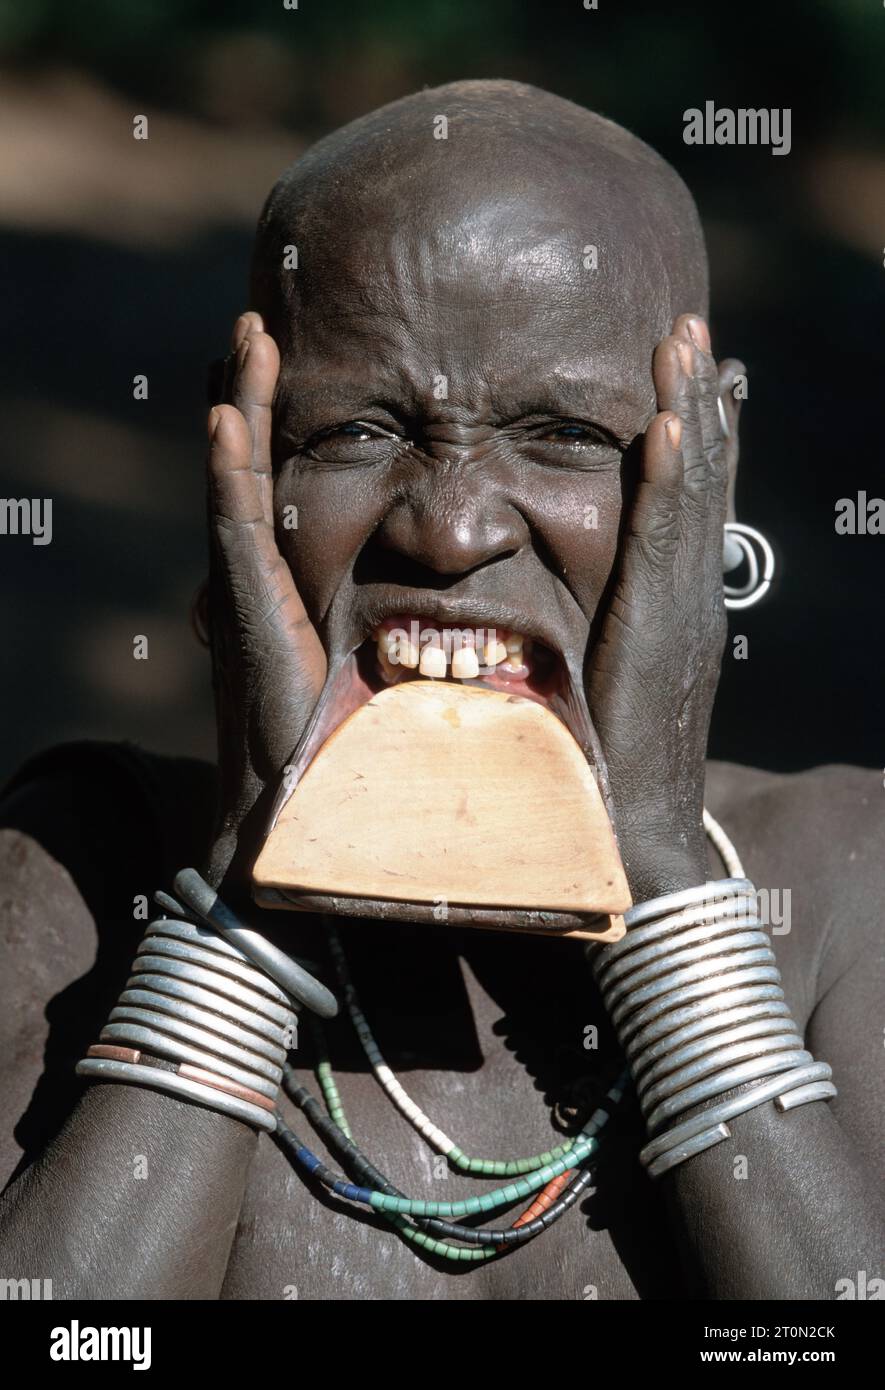 Sudan, SDN, Woman from Kachipo tribe with traditional plate lip, South Sudan Stock Photo